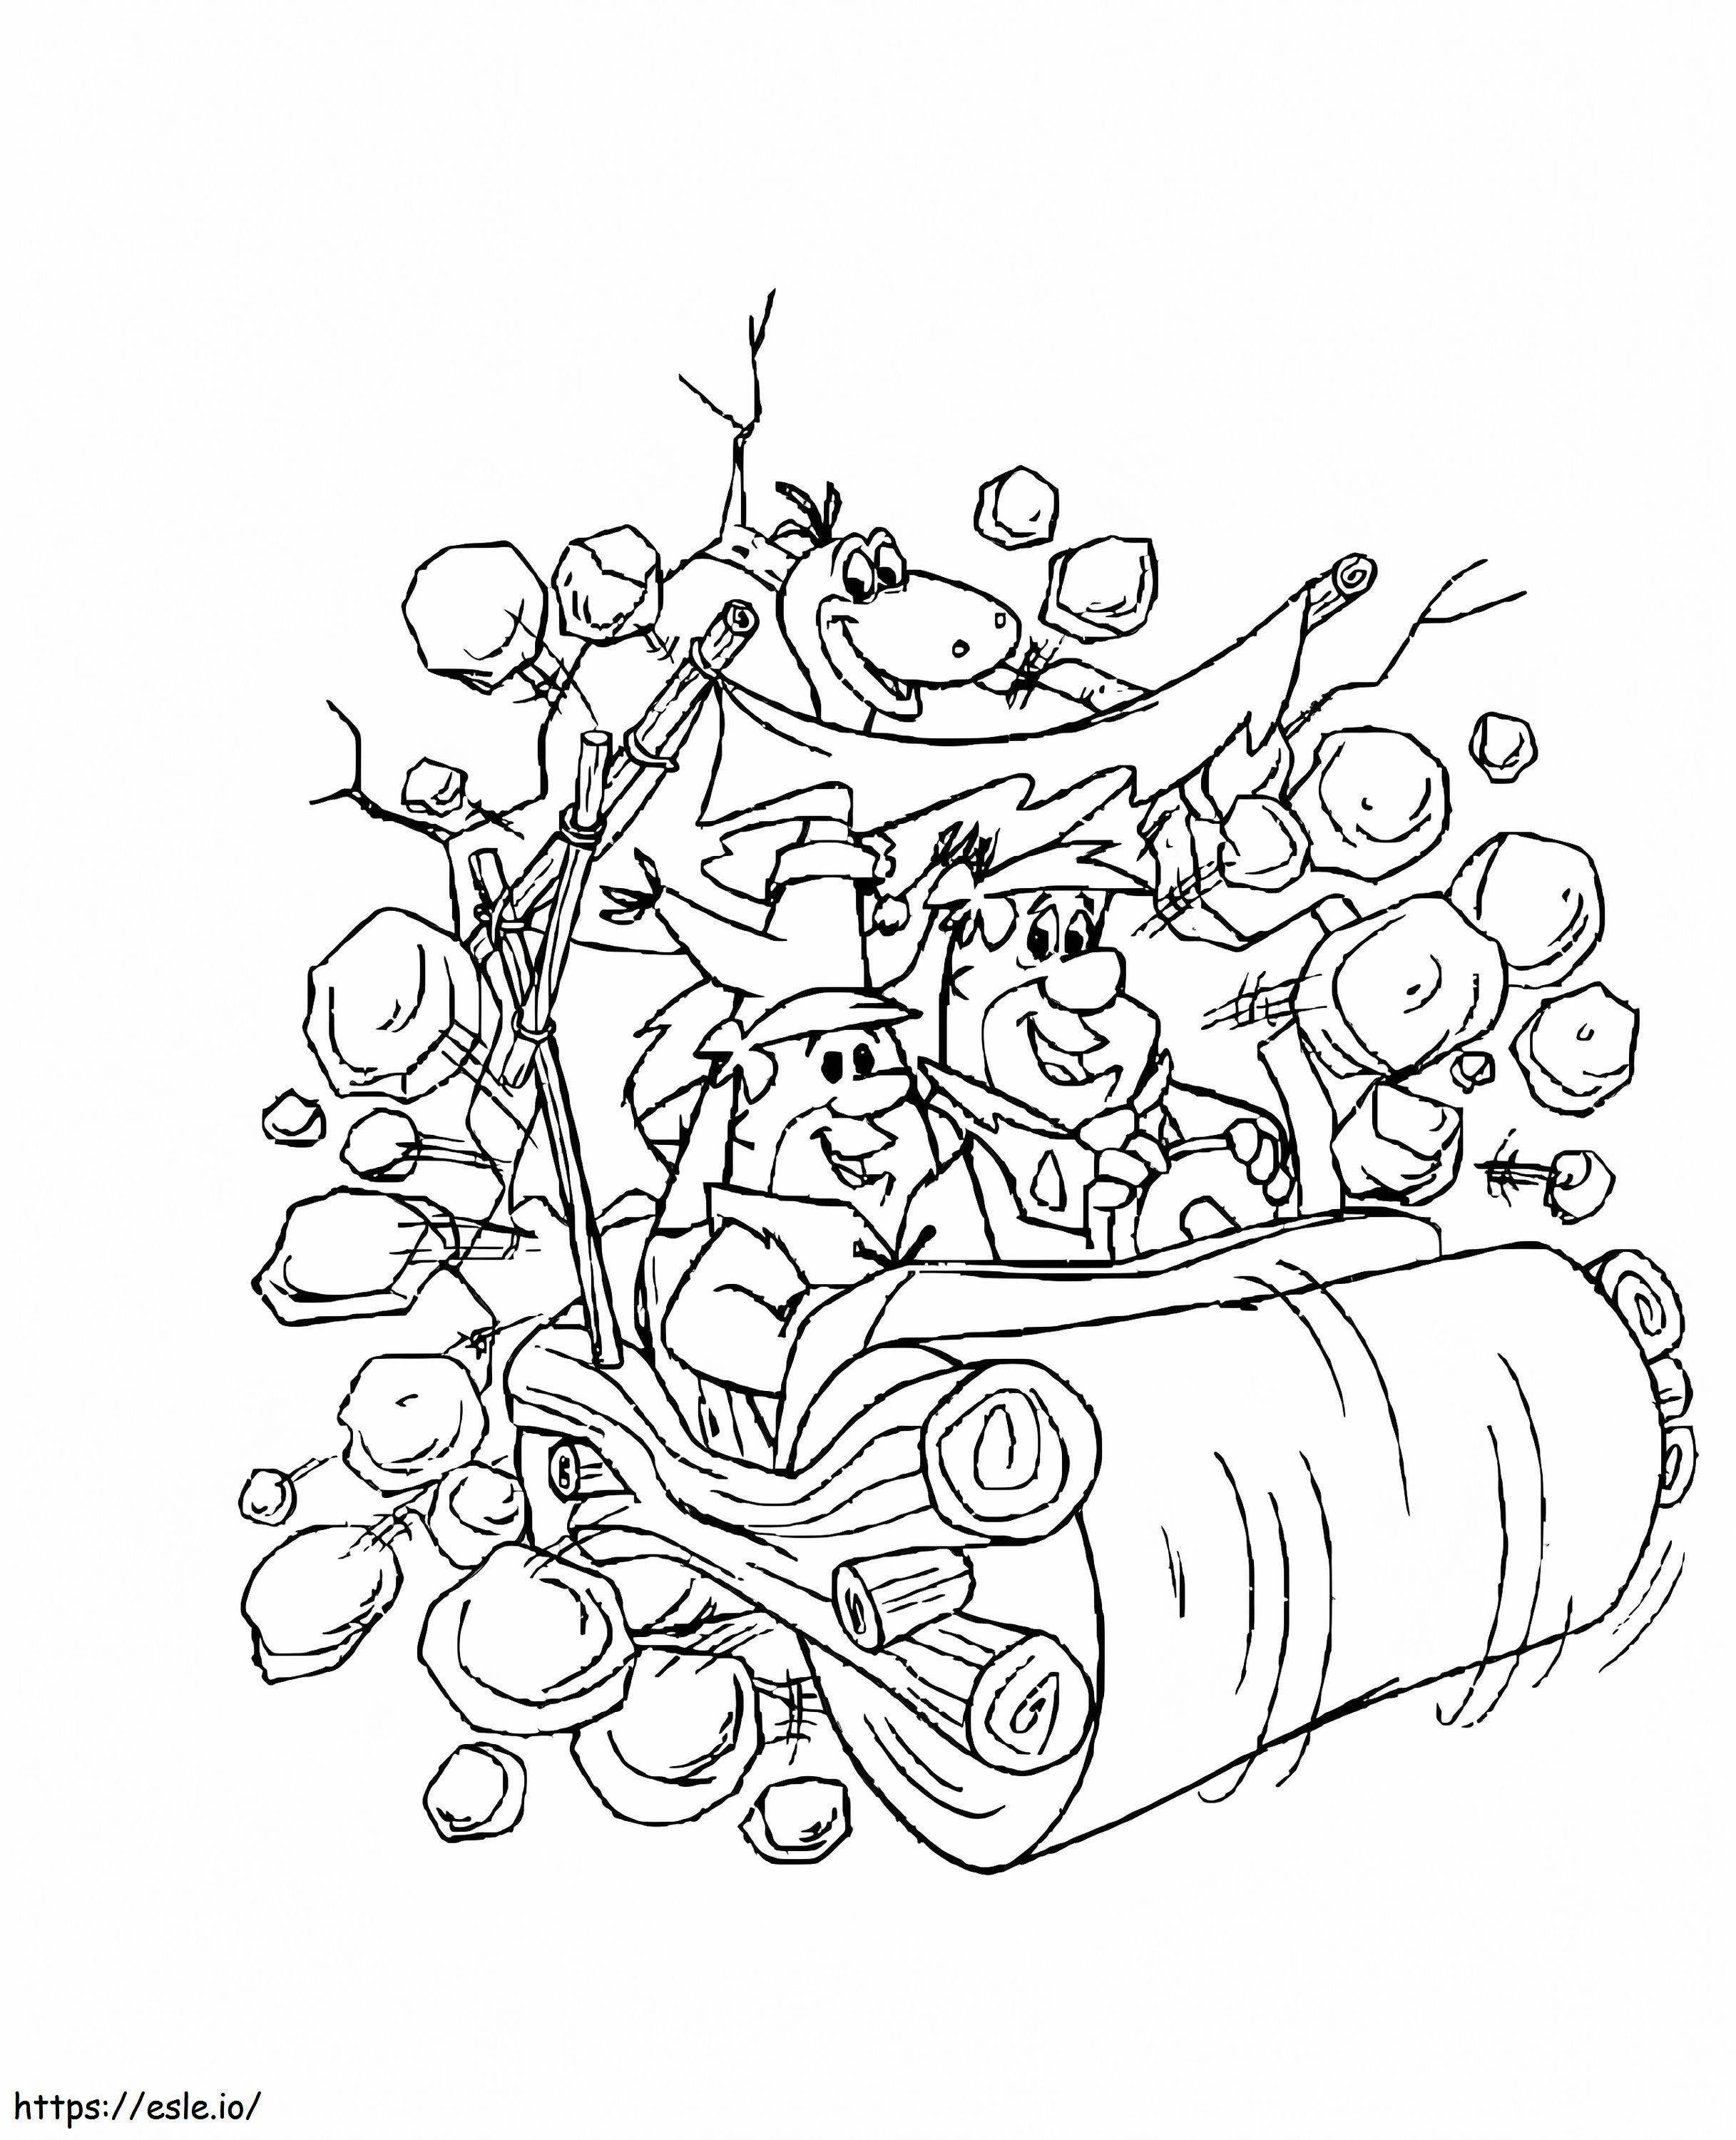 Fred Flintstone And Barney Rubble coloring page